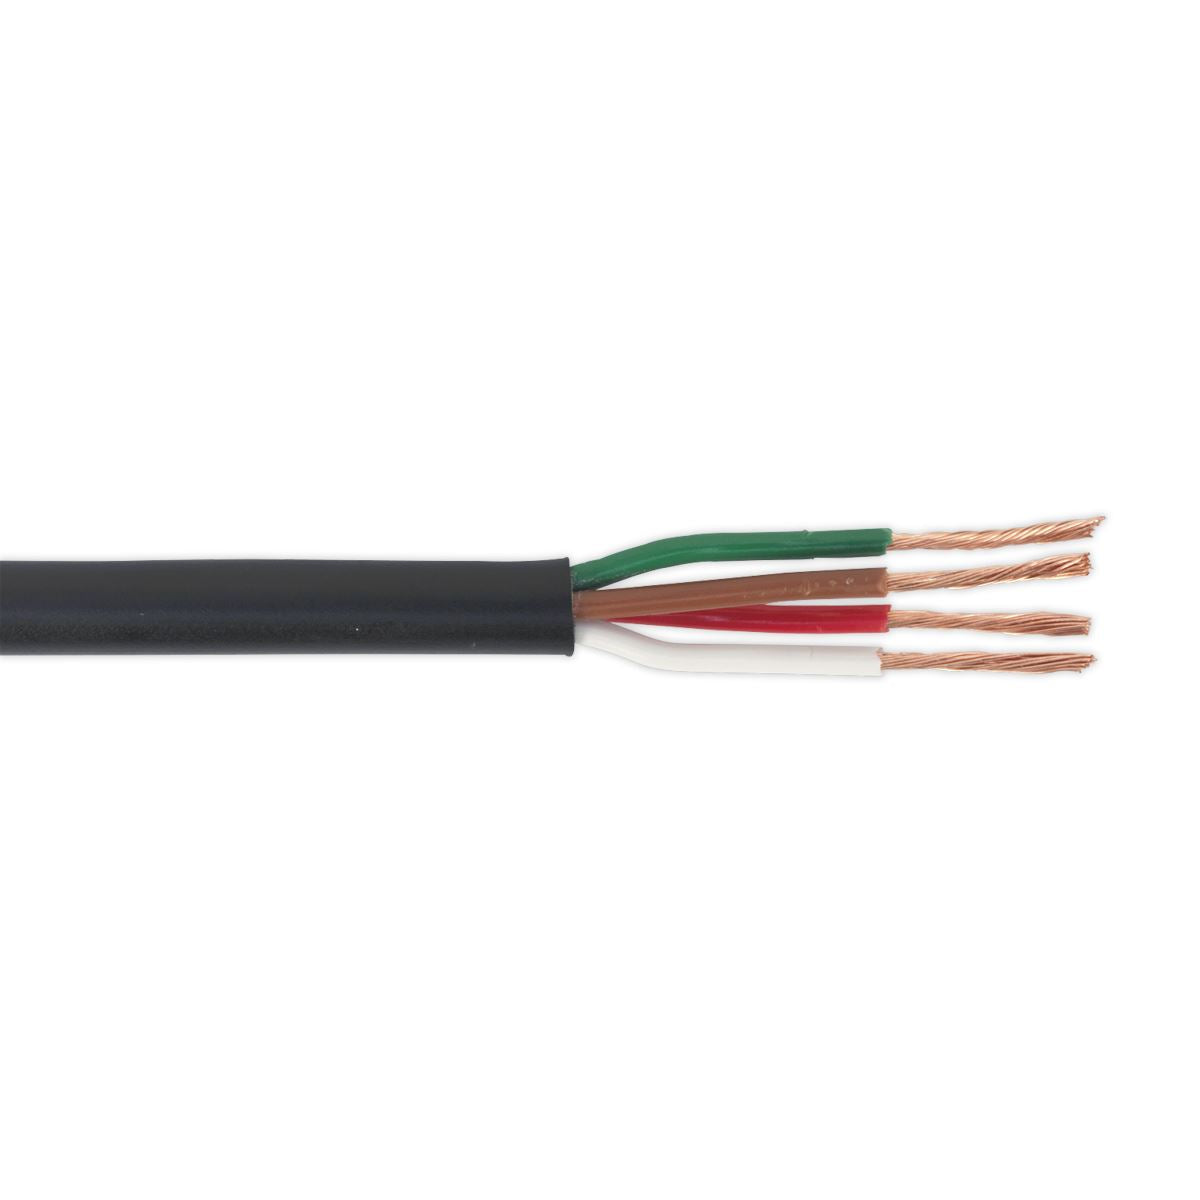 Sealey Automotive Cable Thin Wall 4 x 0.75mm² 24/0.20mm 30m Black